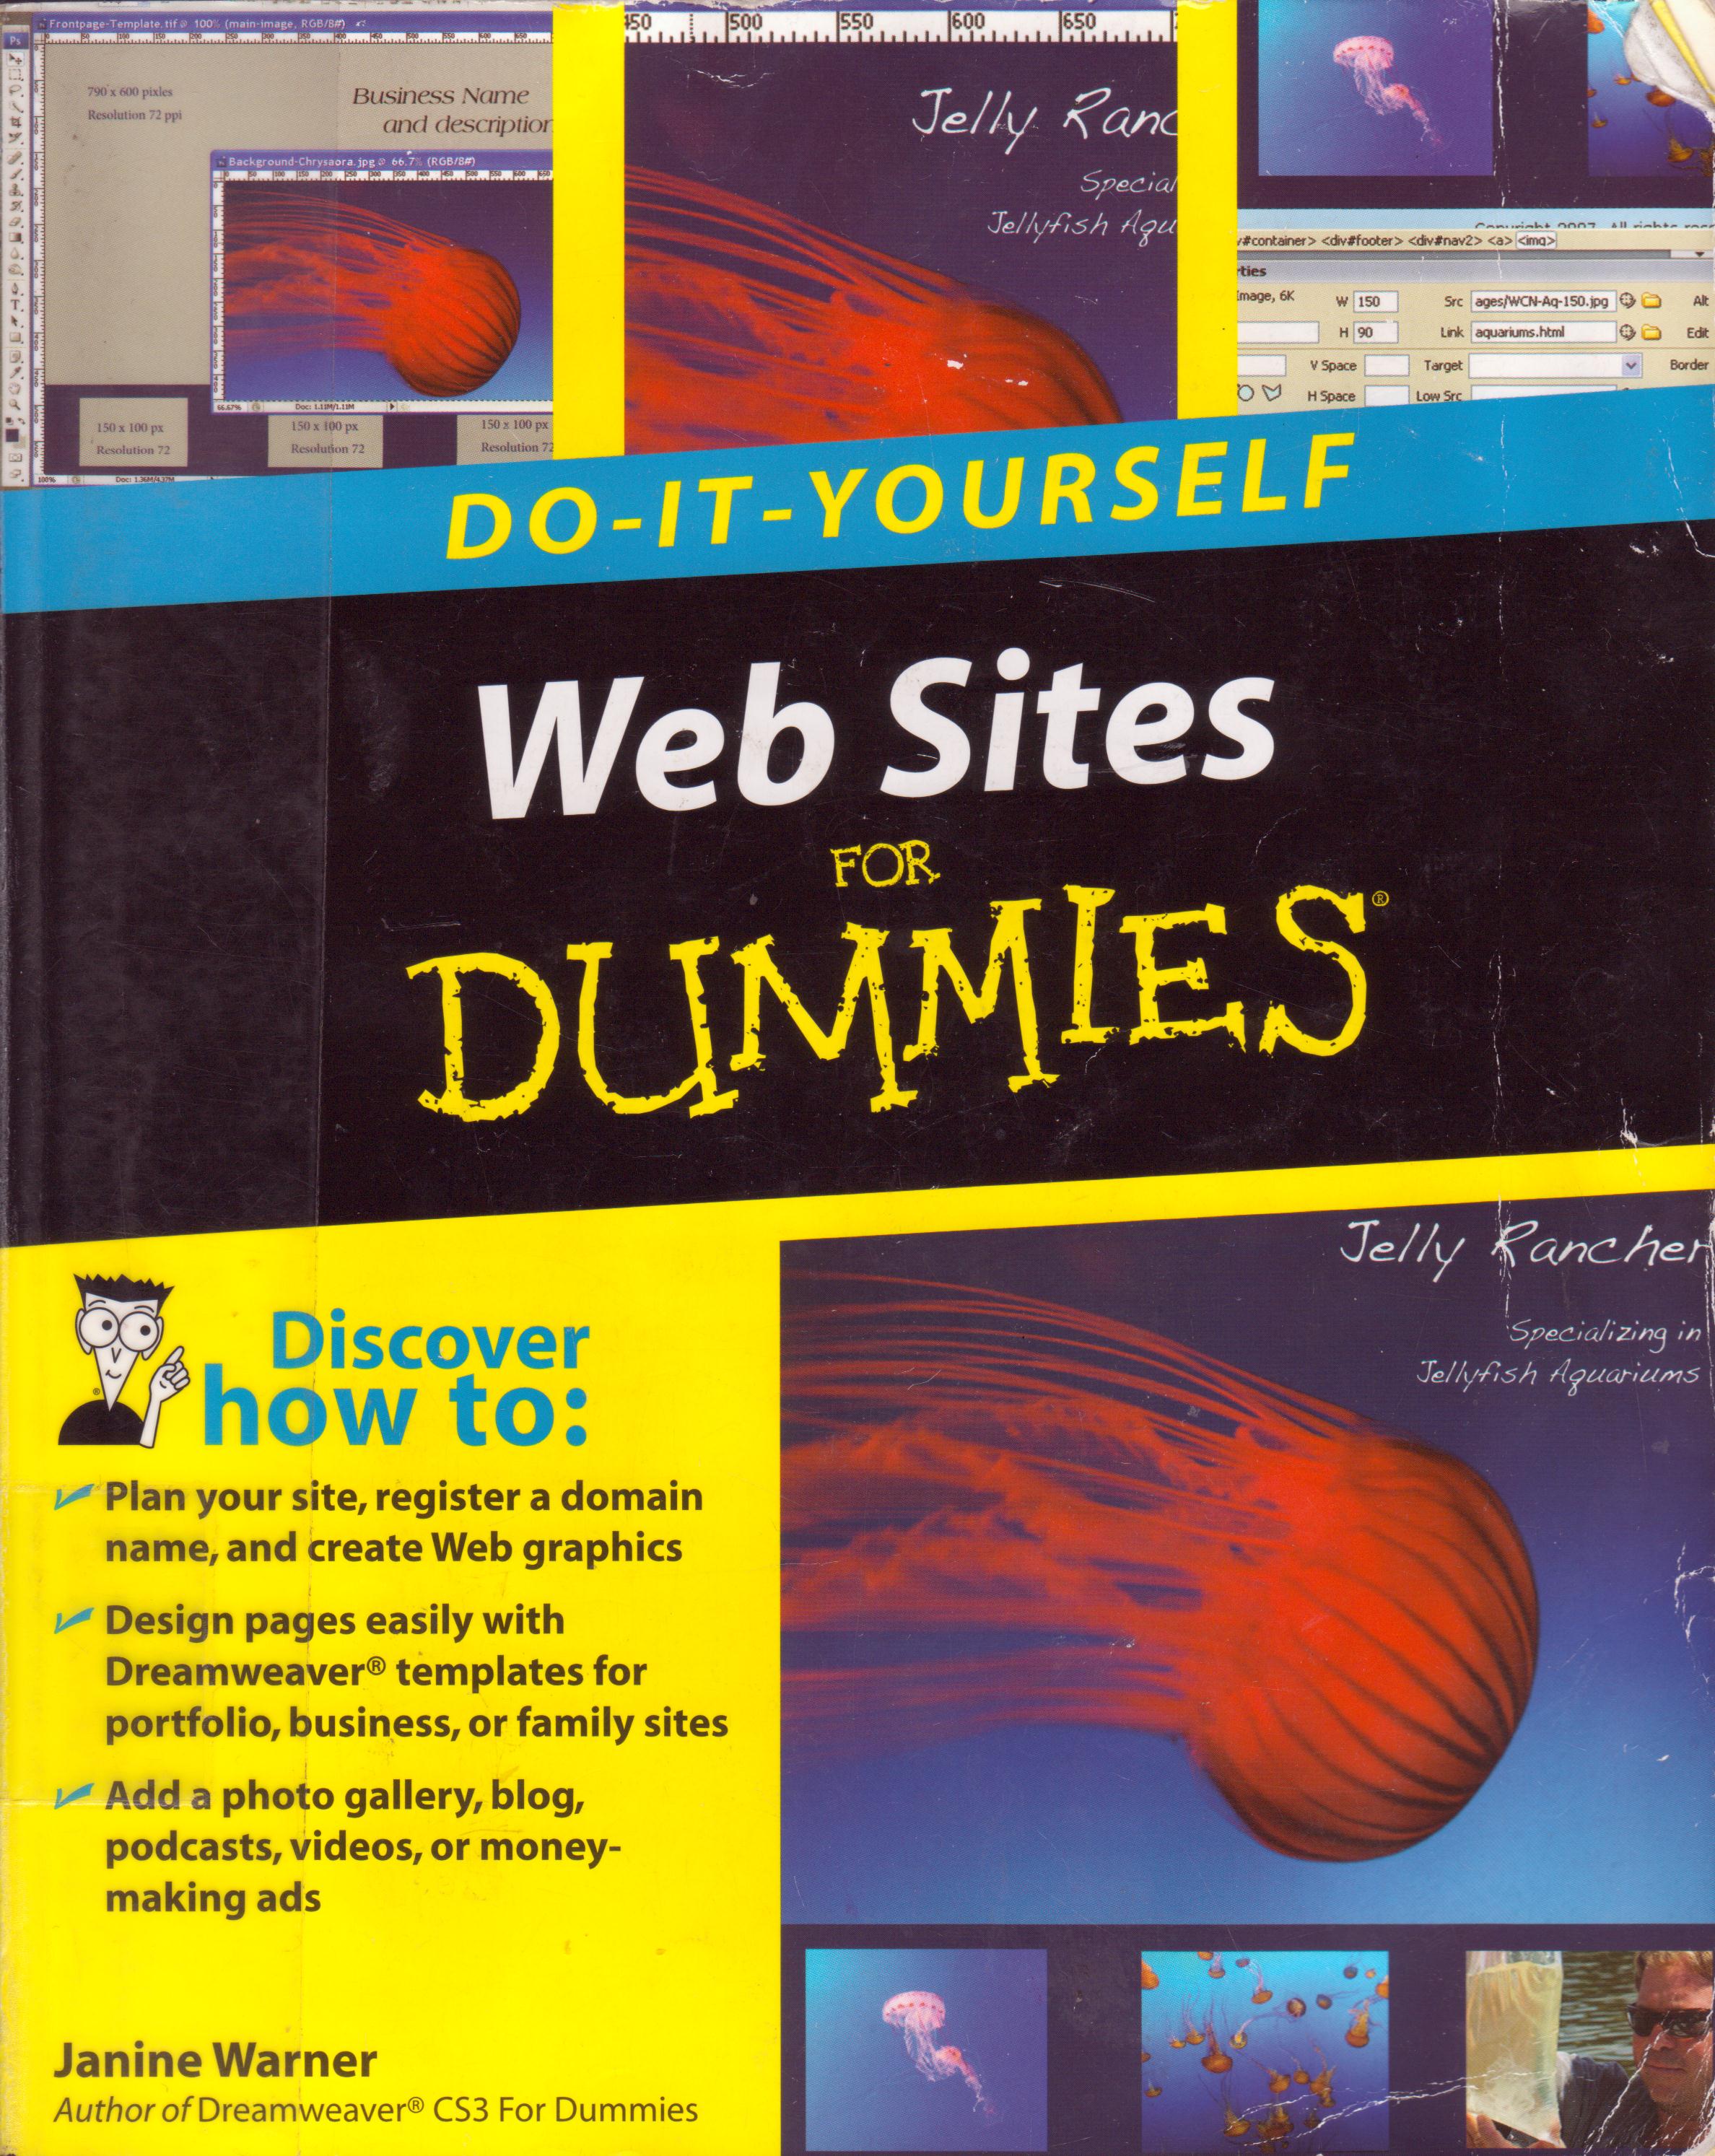 Do it yourself: Websites for DUMMIES